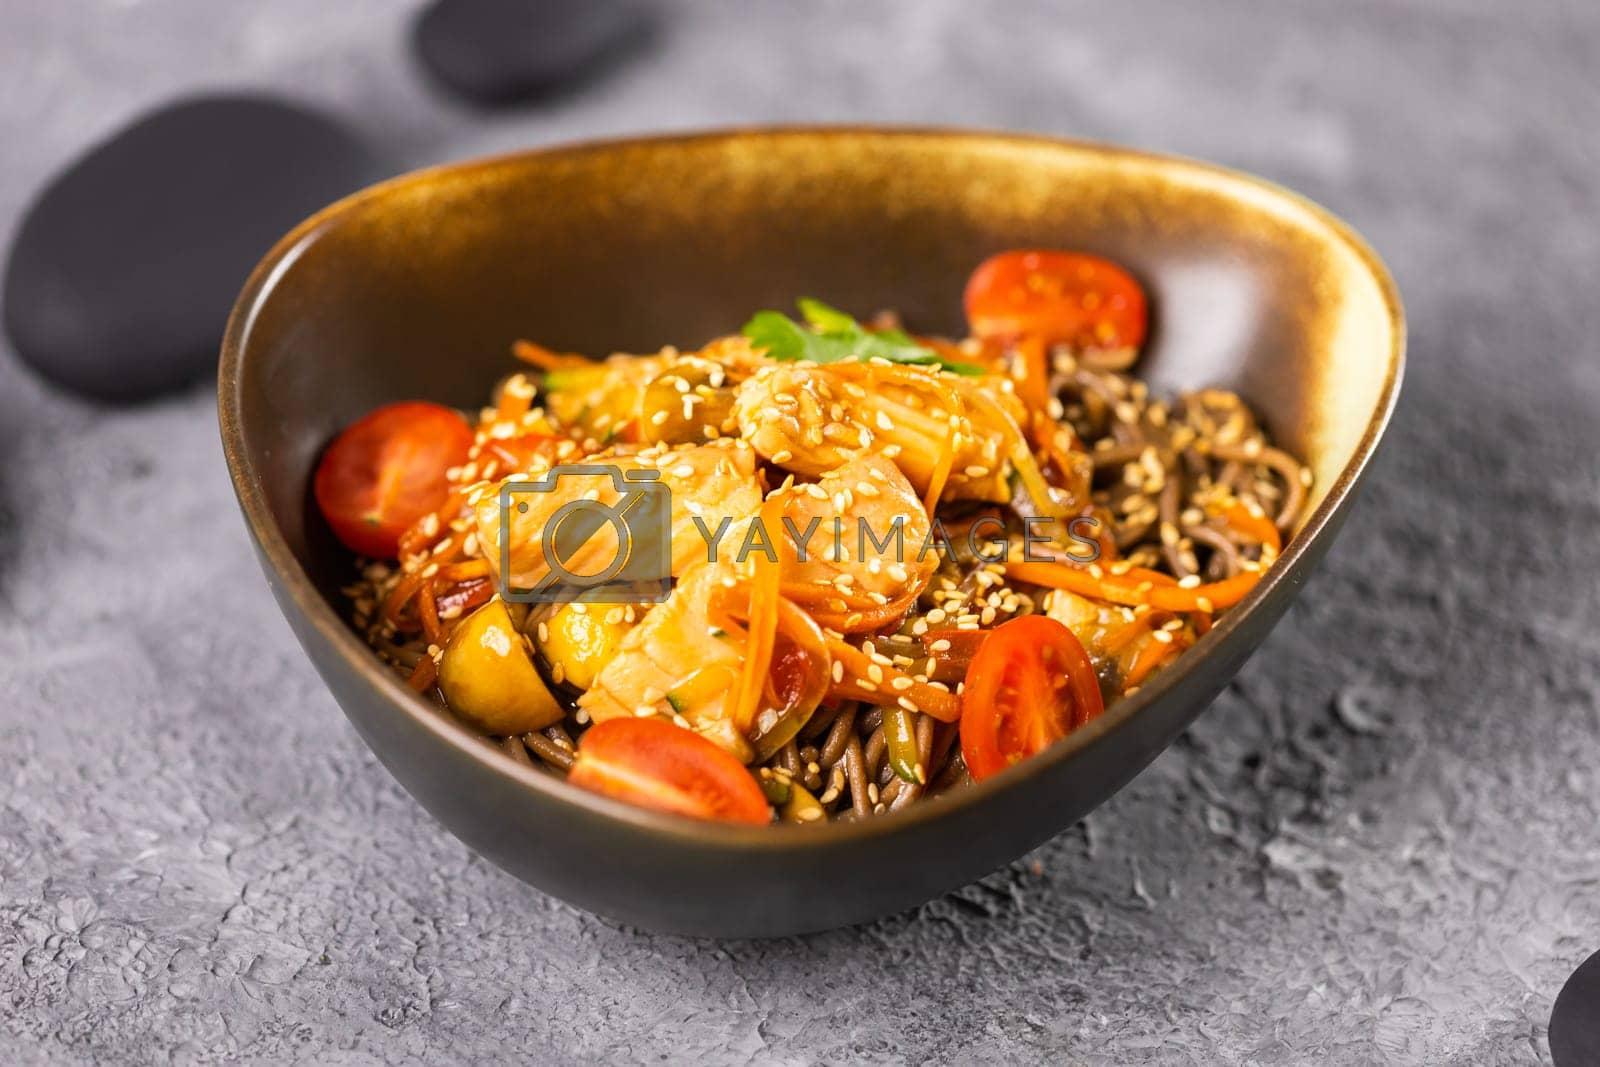 Royalty free image of Udon stir-fry noodles with salmon and vegetables. Asian cuisine by Satura86